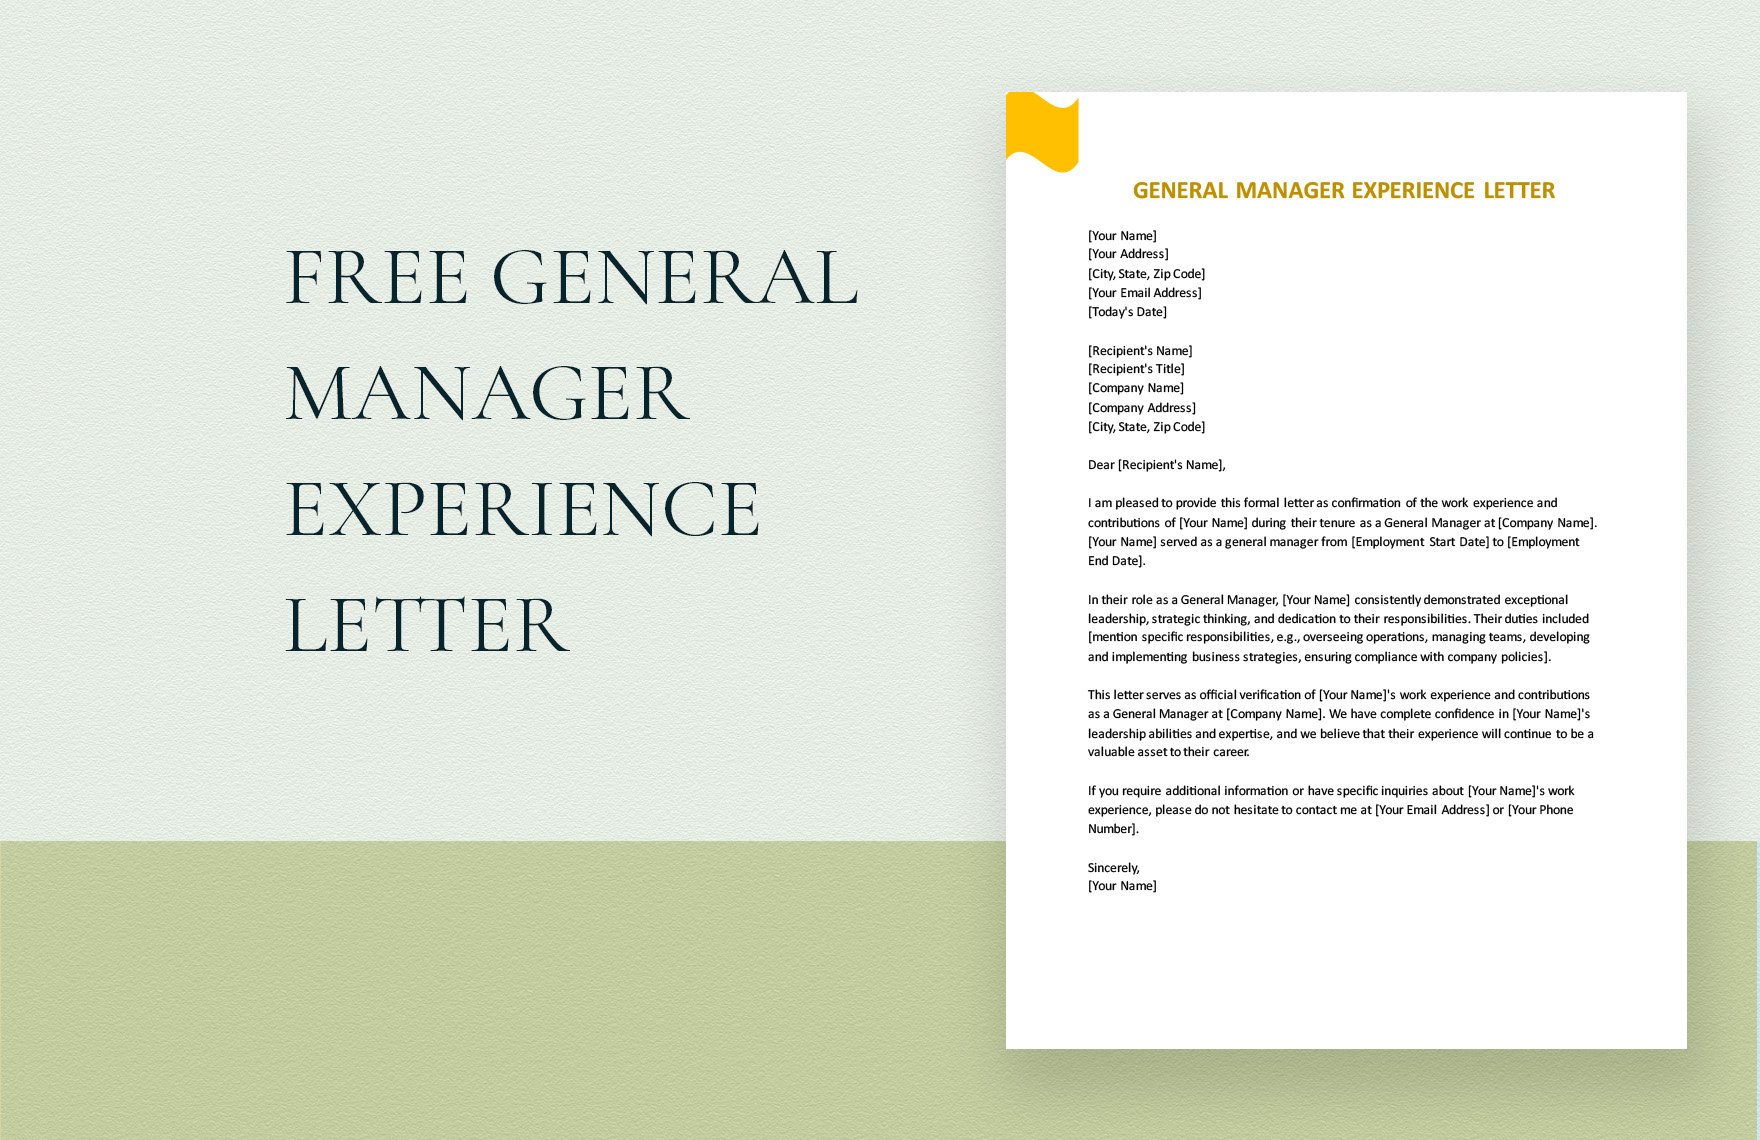 General Manager Experience Letter